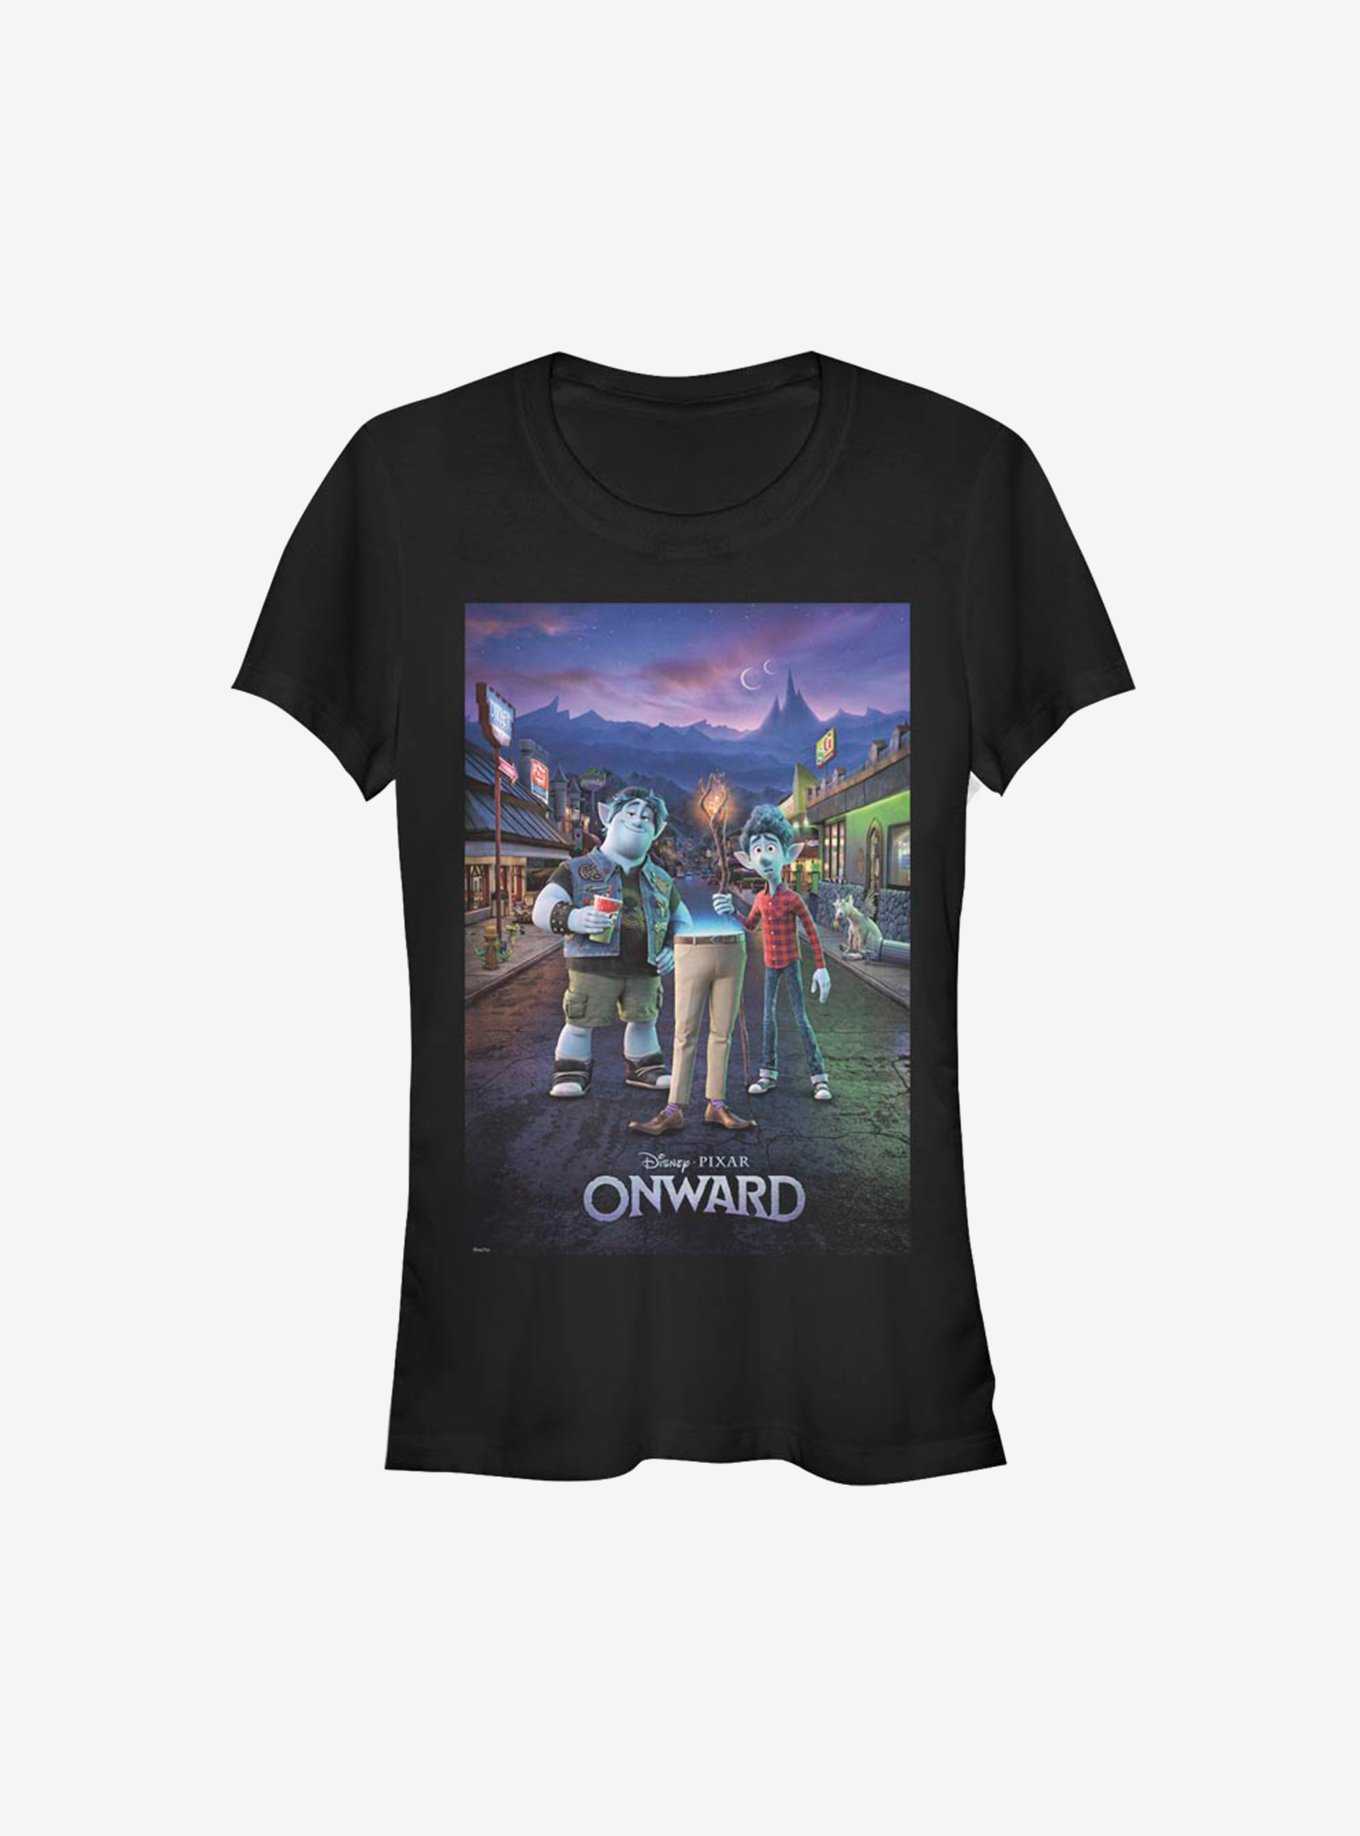 OFFICIAL Onward Movie Merchandise & T-Shirts | Hot Topic